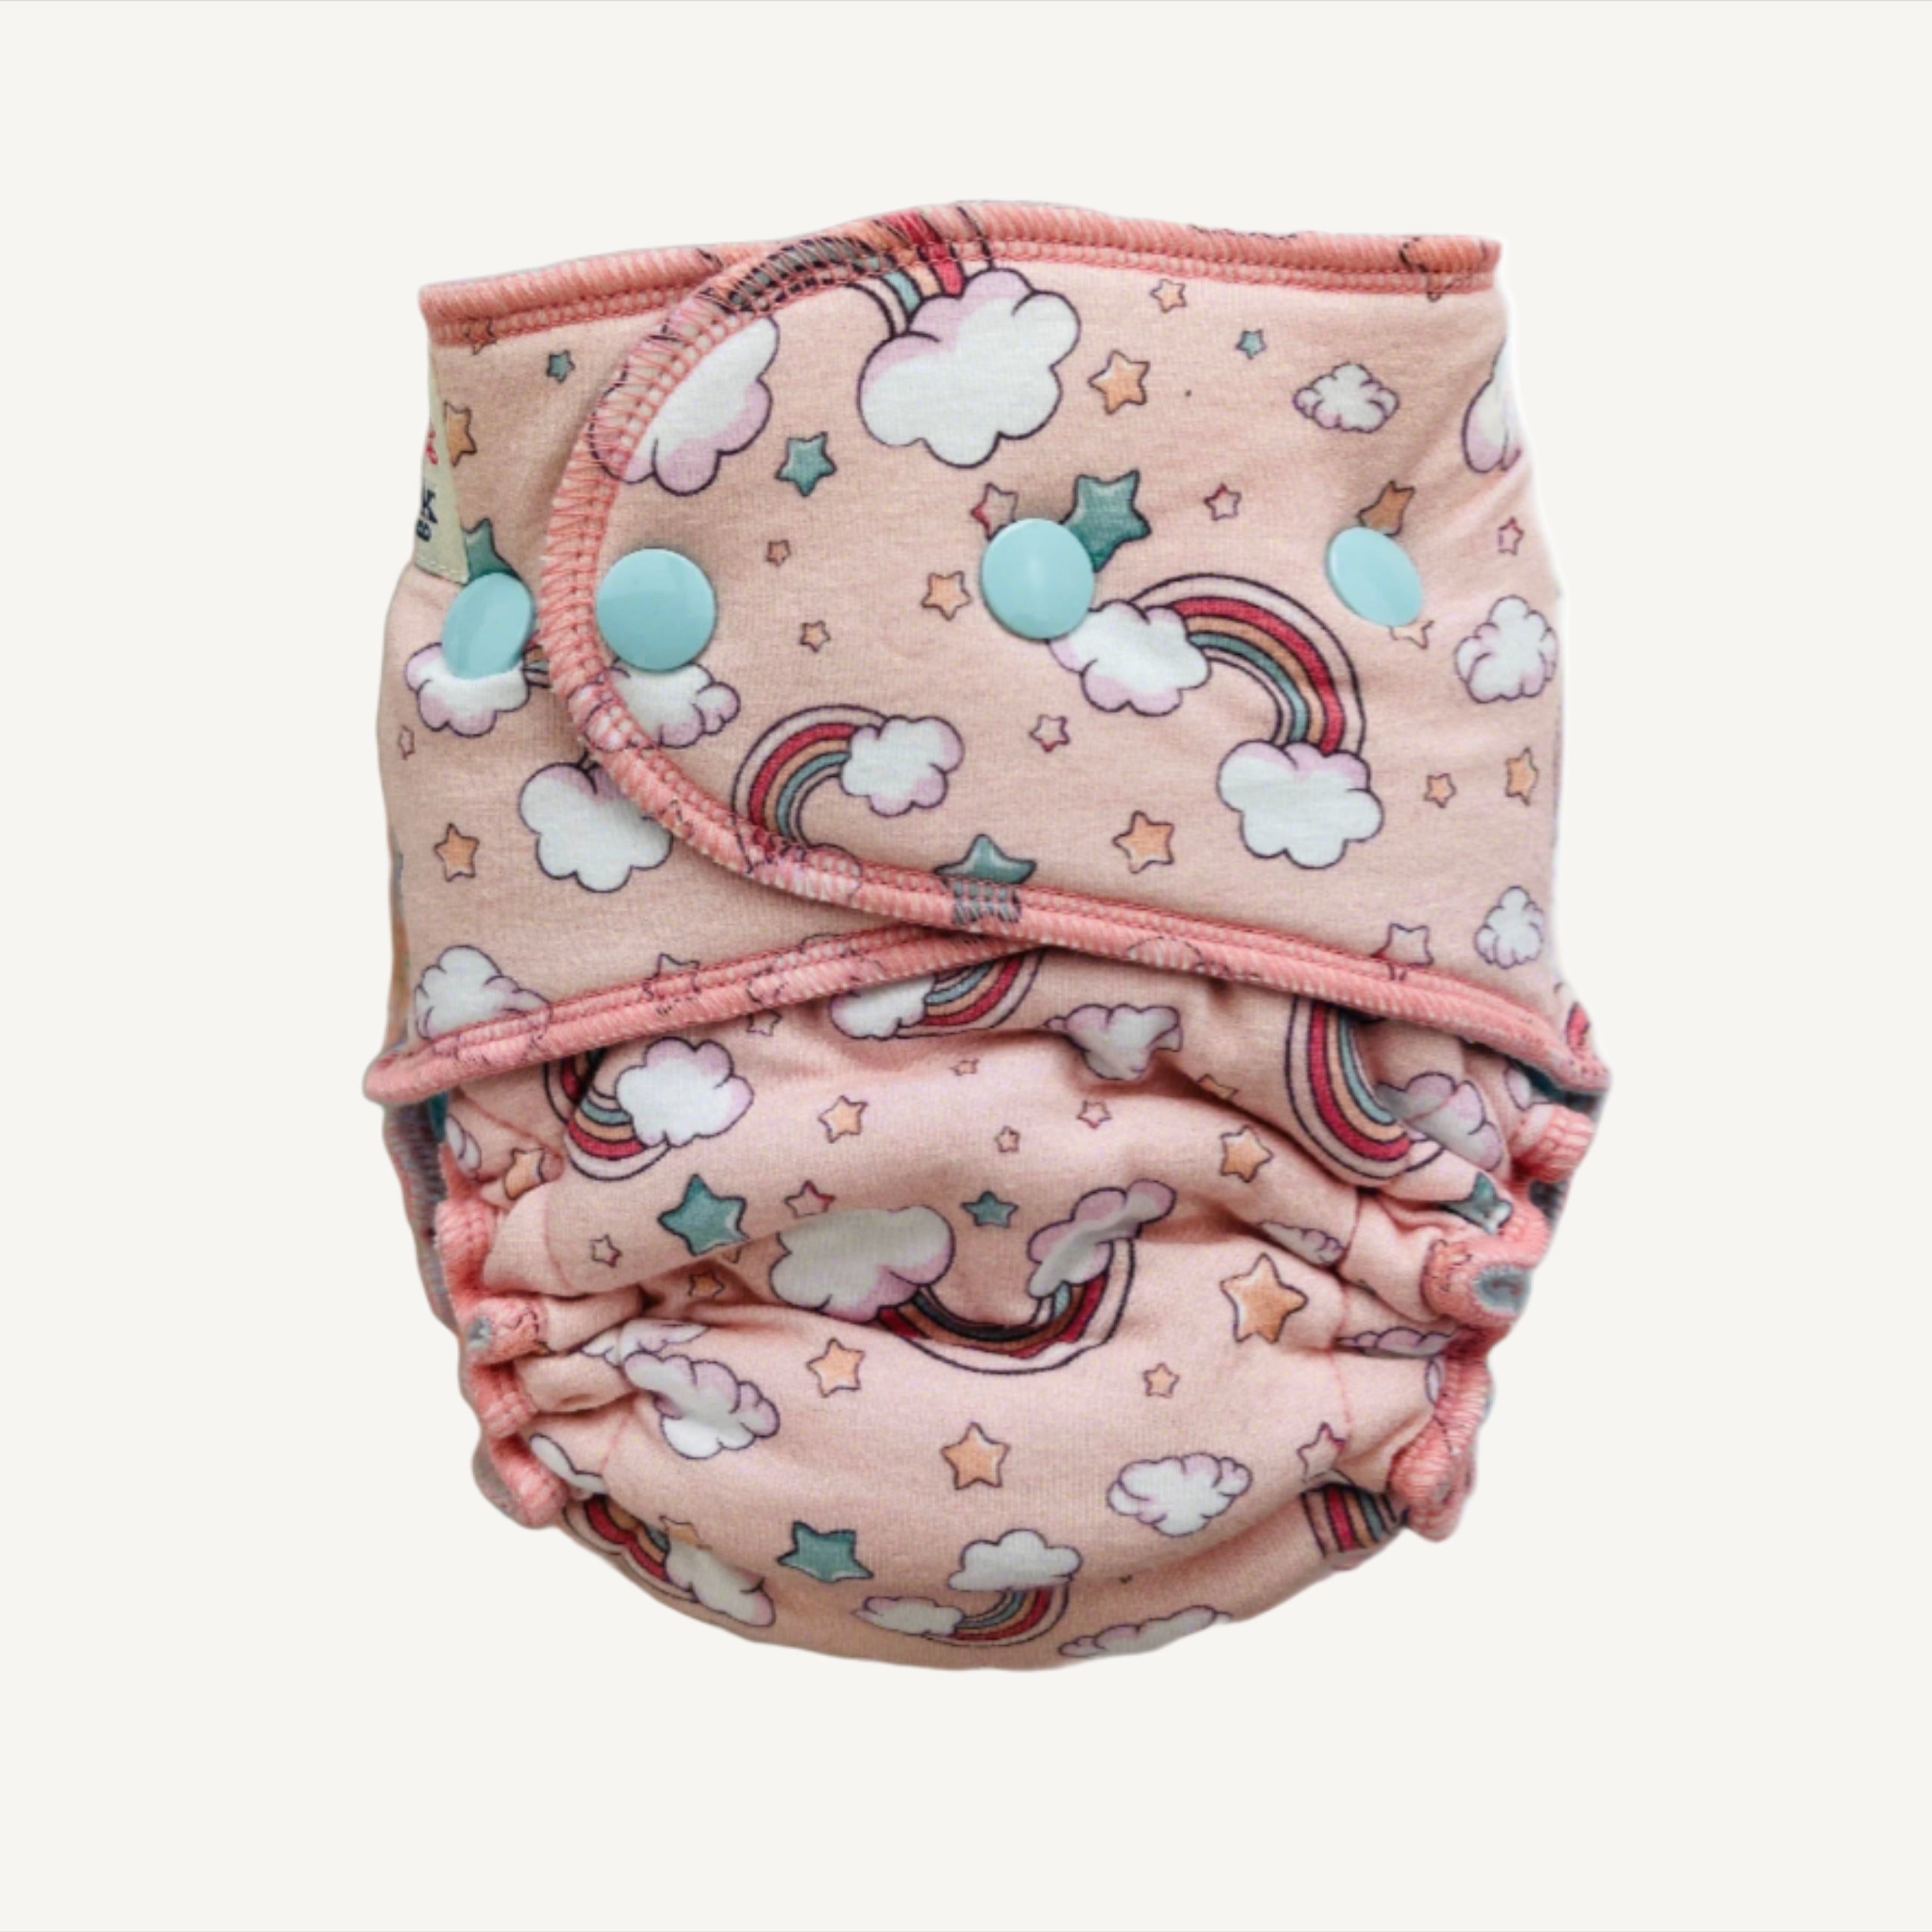 Lilly & Frank Petite Cloth Diaper Precious Skies Petite Cloth Diaper - Fitted - Classic Serged